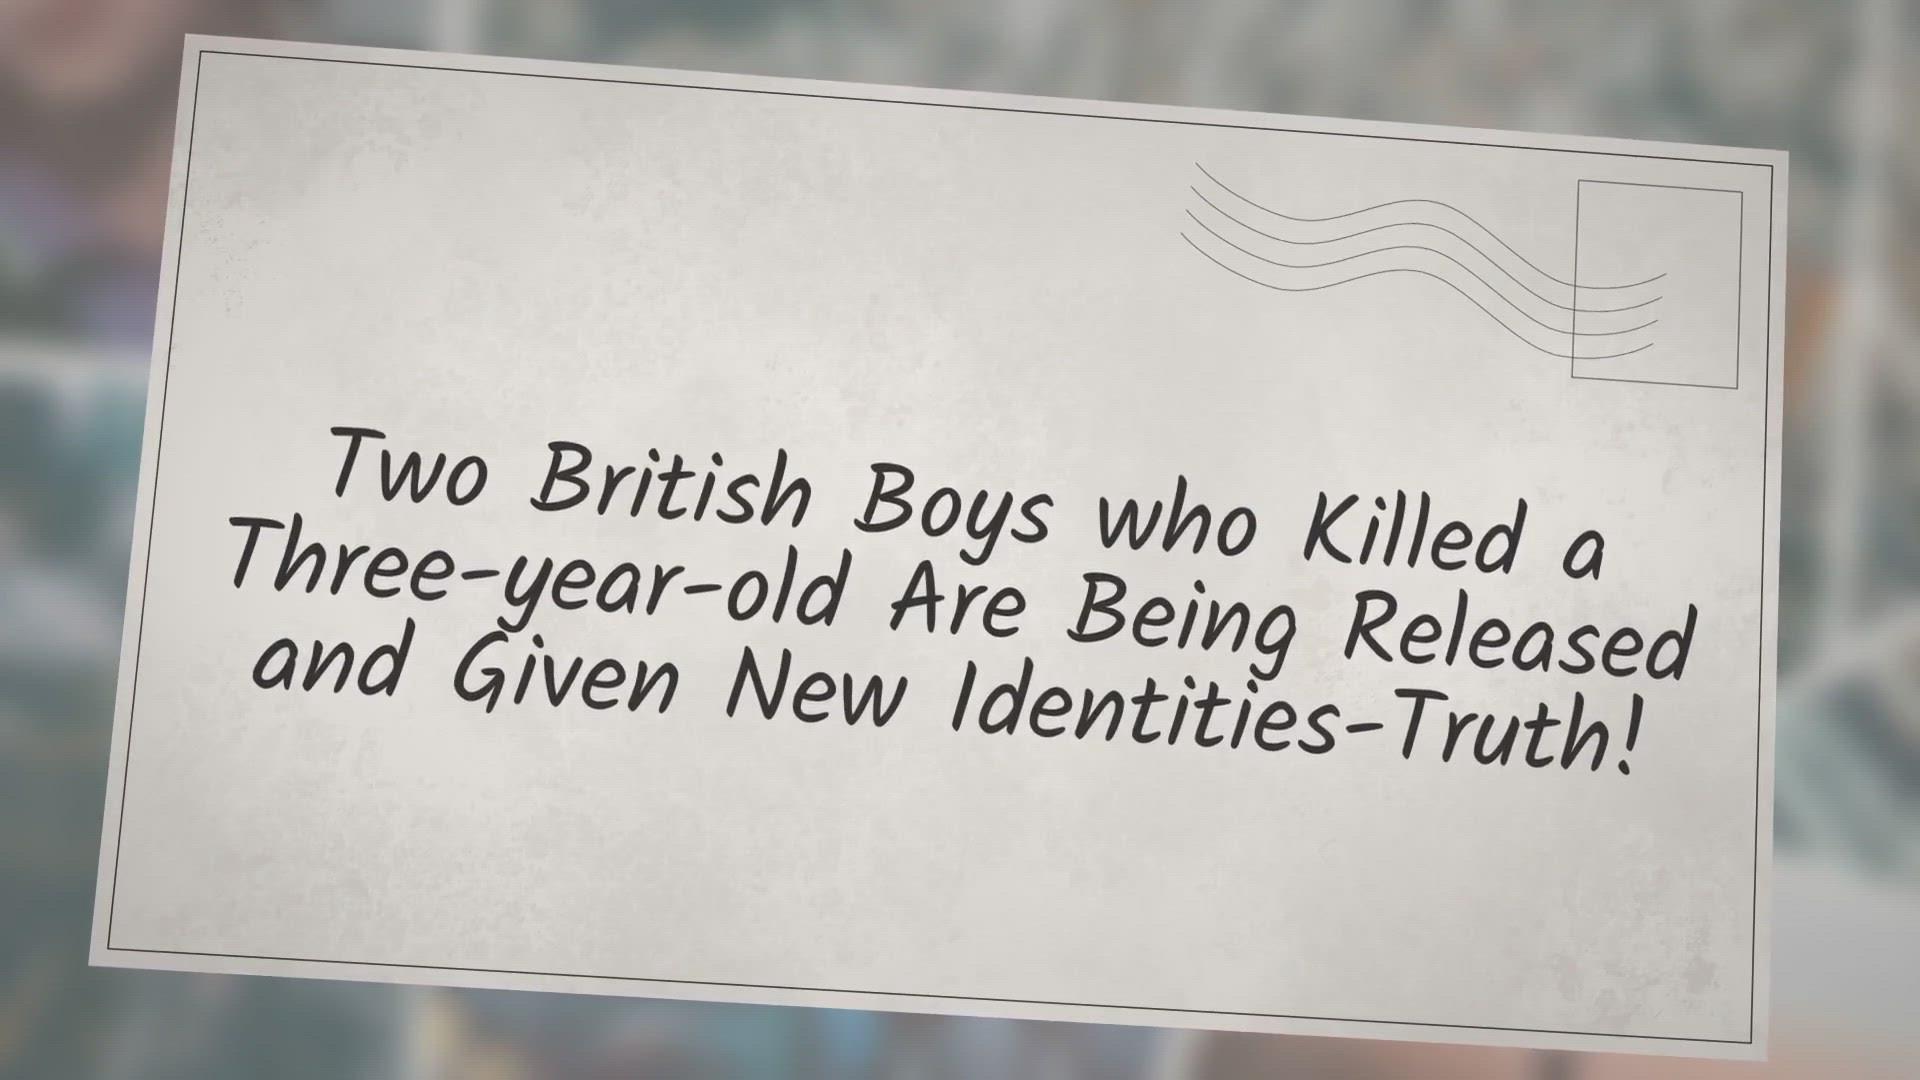 'Video thumbnail for Two British Boys who Killed a Three-year-old Are Being Released and Given New Identities-Truth!'